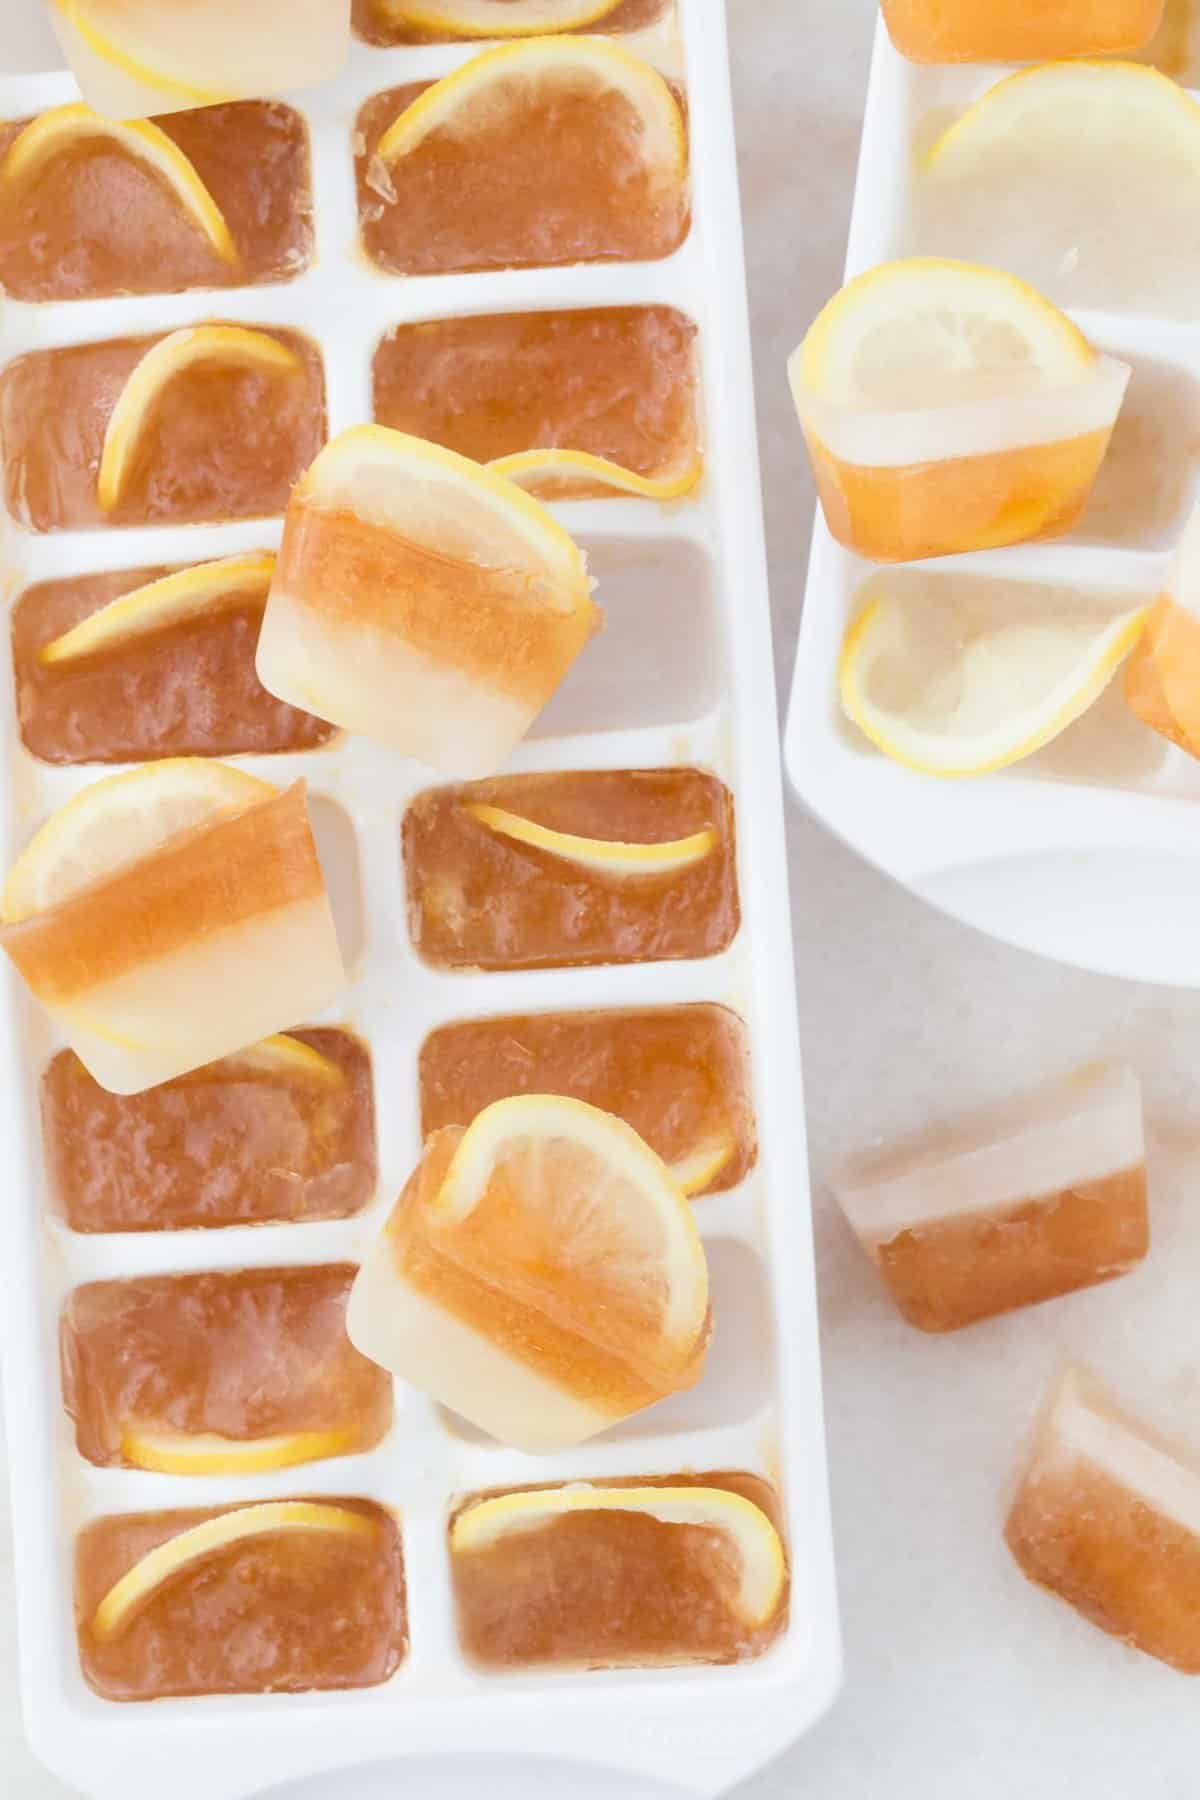 These refreshing Arnold Palmer Ice Cubes keep tea from diluting and they add a pop of flavor to a tall glass of lemonade and water